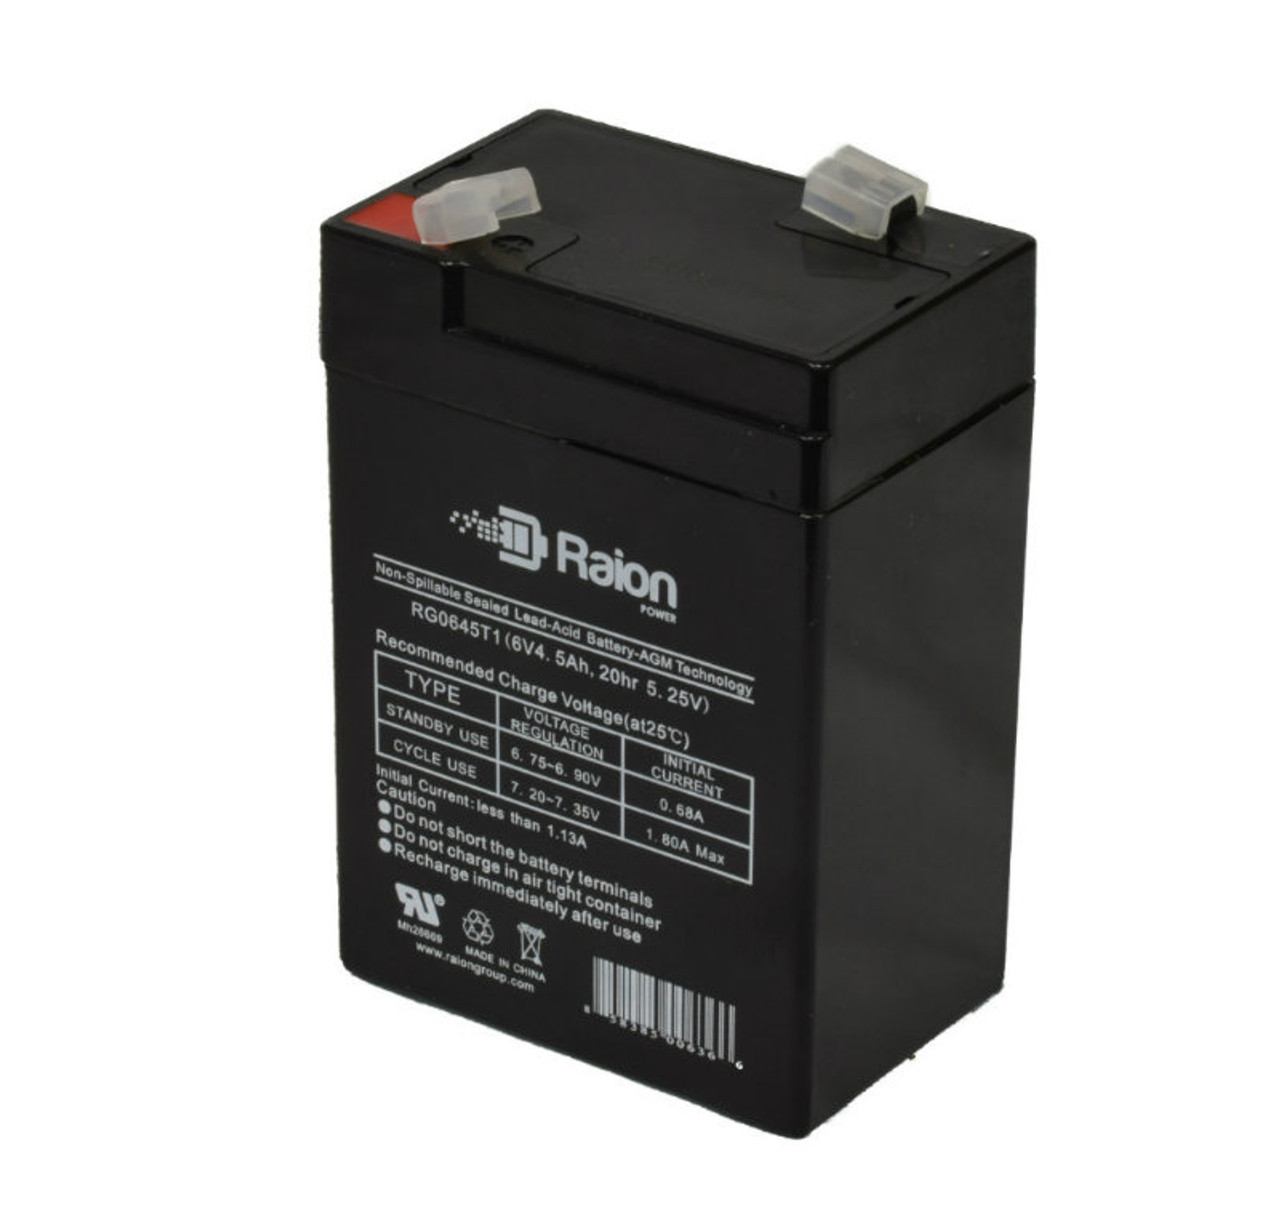 Raion Power RG0645T1 6V 4.5Ah Replacement Battery Cartridge for Sure-Lites LM1